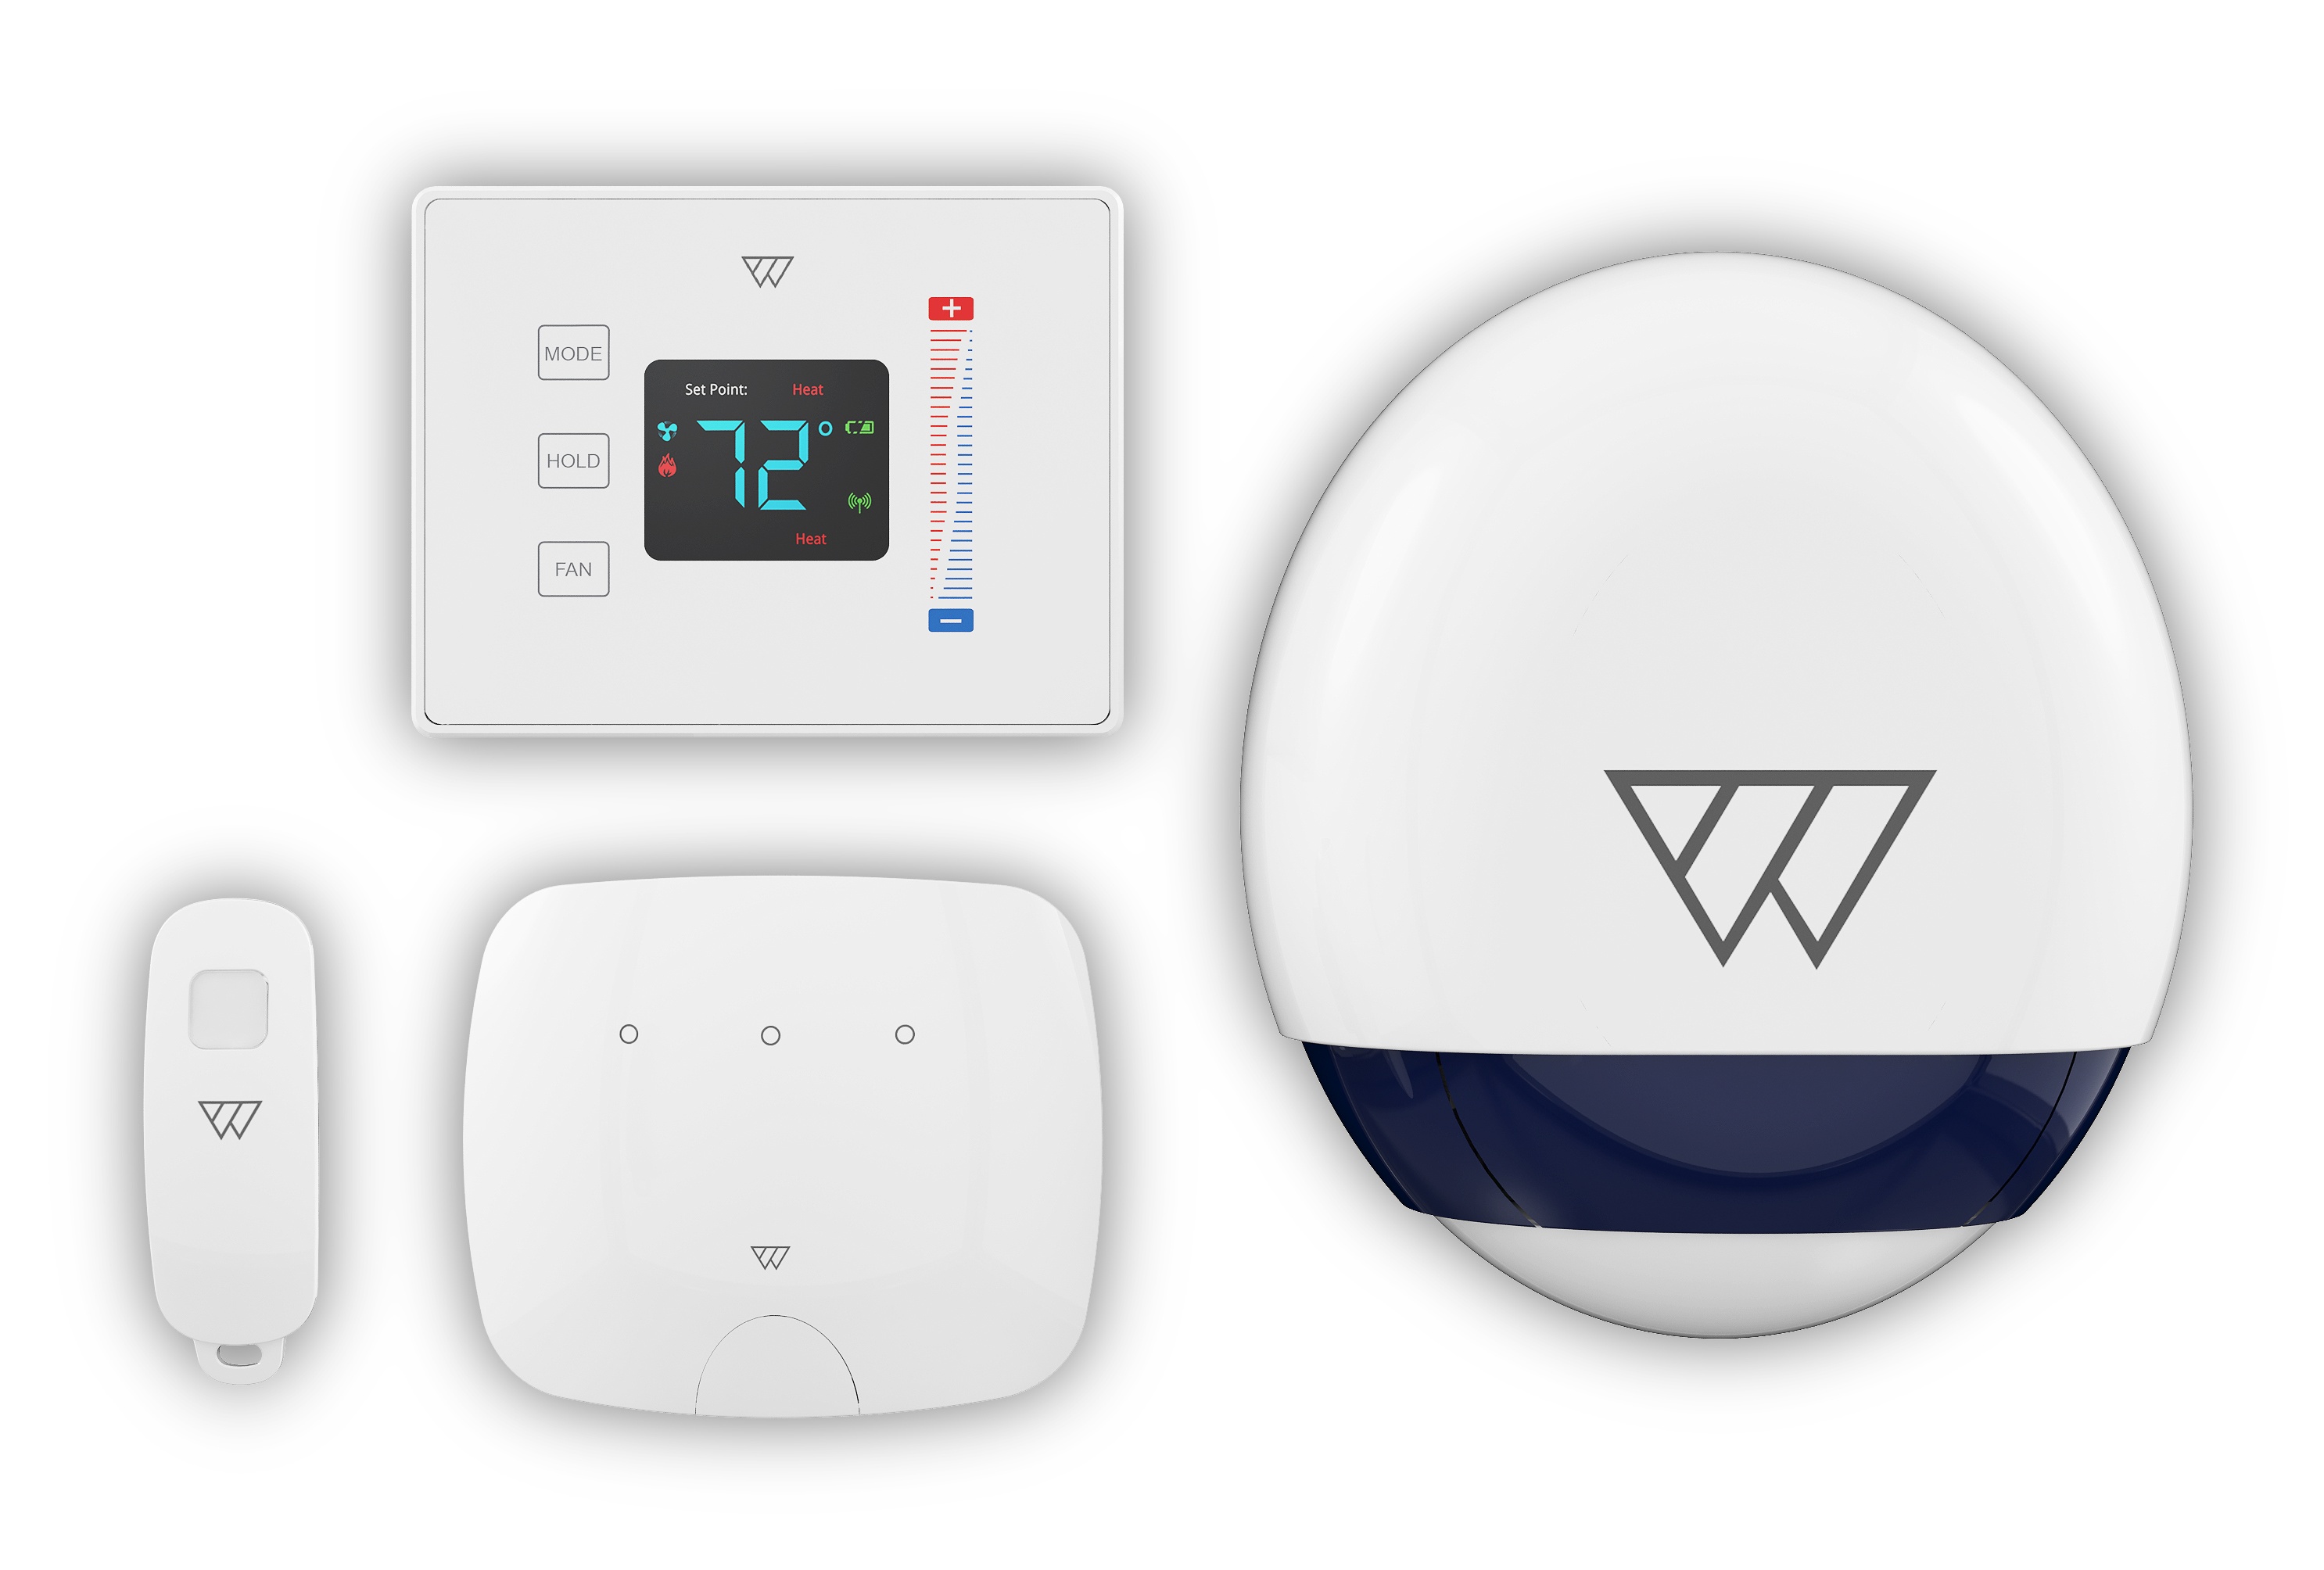 Tipping point - world’s first intelligent home automation system launched